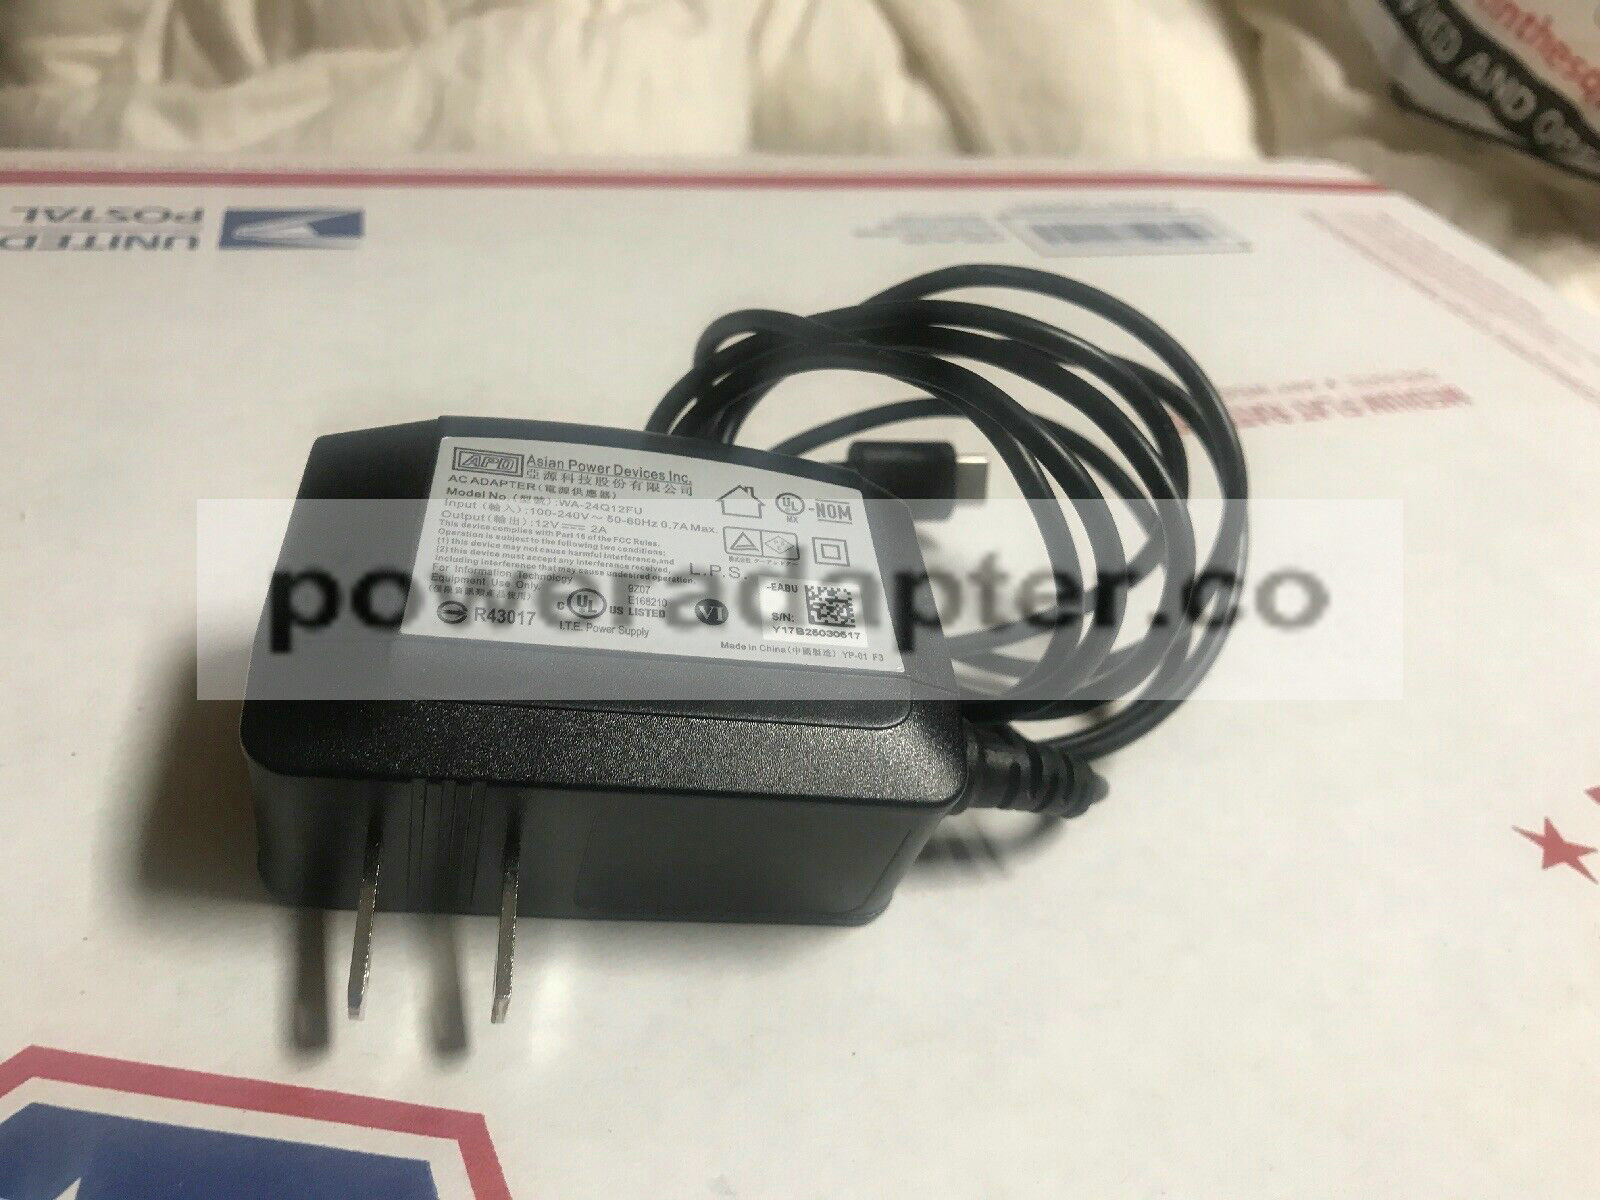 APD AC adapter Charger 12V 2A WA-24Q12FU USB Type C Asian Power Devices USA EU UK plug Products specifications Model - Click Image to Close